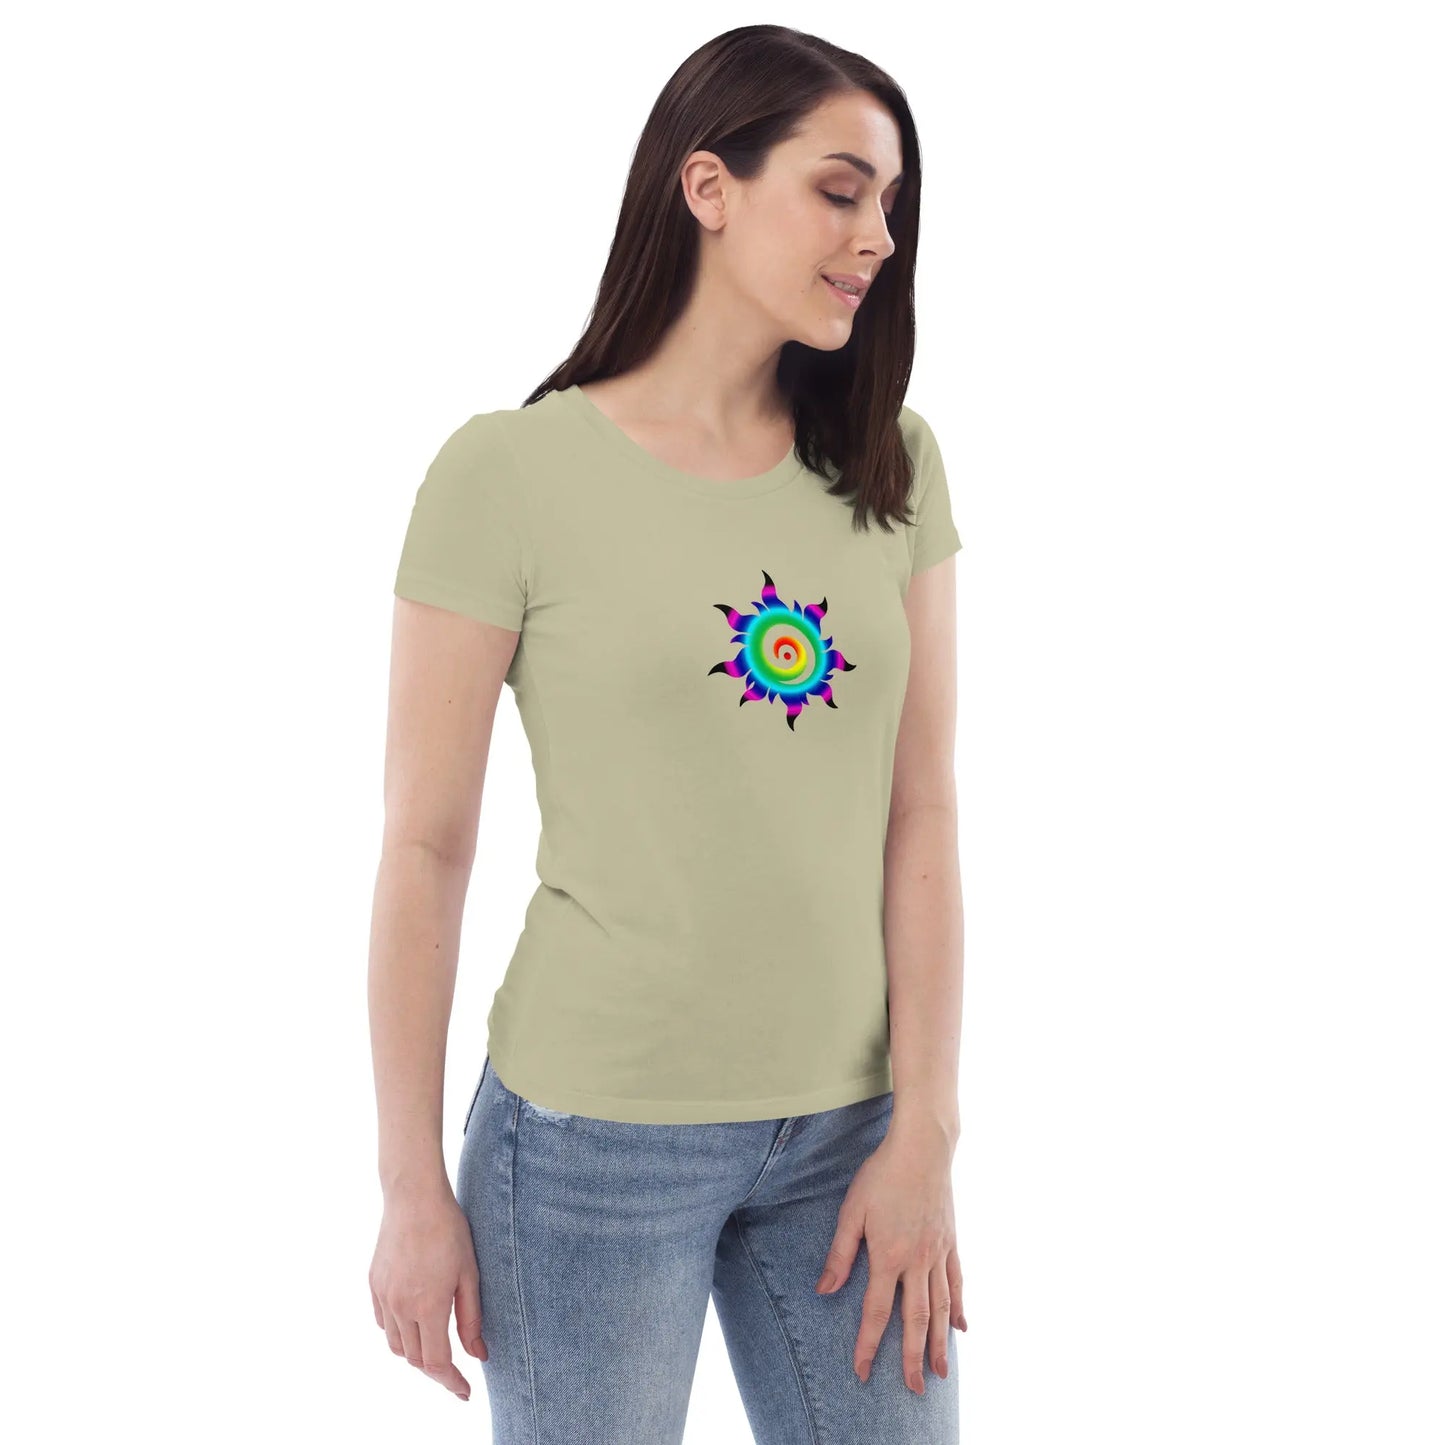 Women's fitted eco tee ActSunx - Image #15